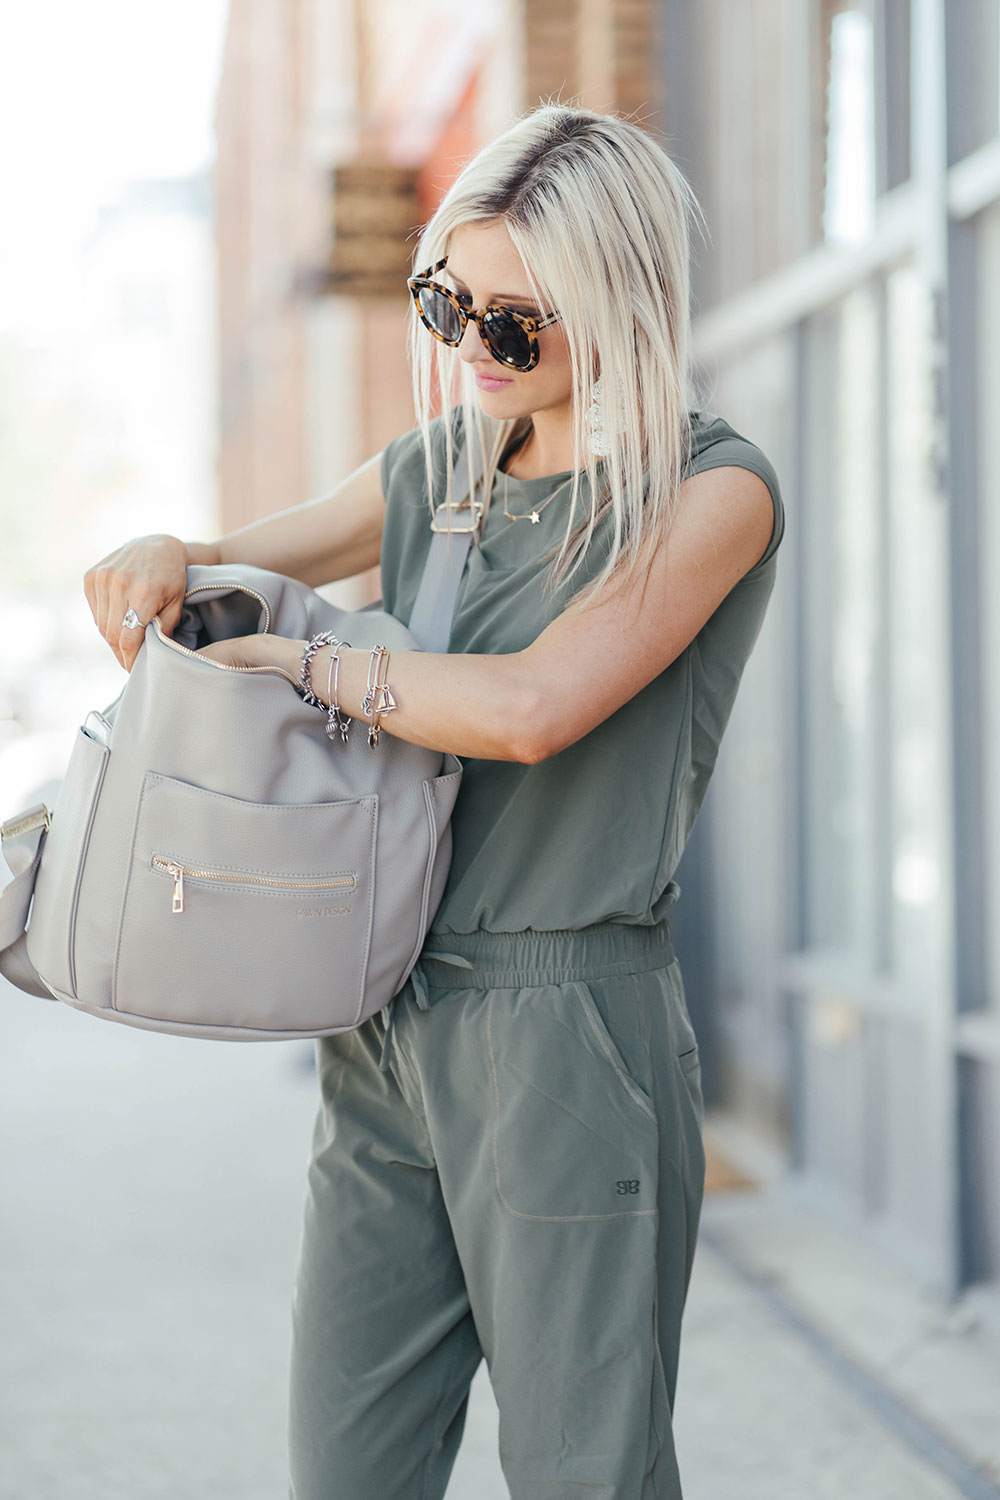 How to wear a jumpsuit 4 ways | summer outfit ideas | stylish mom outfits | how to style a diaper bag | Little Miss Fearless